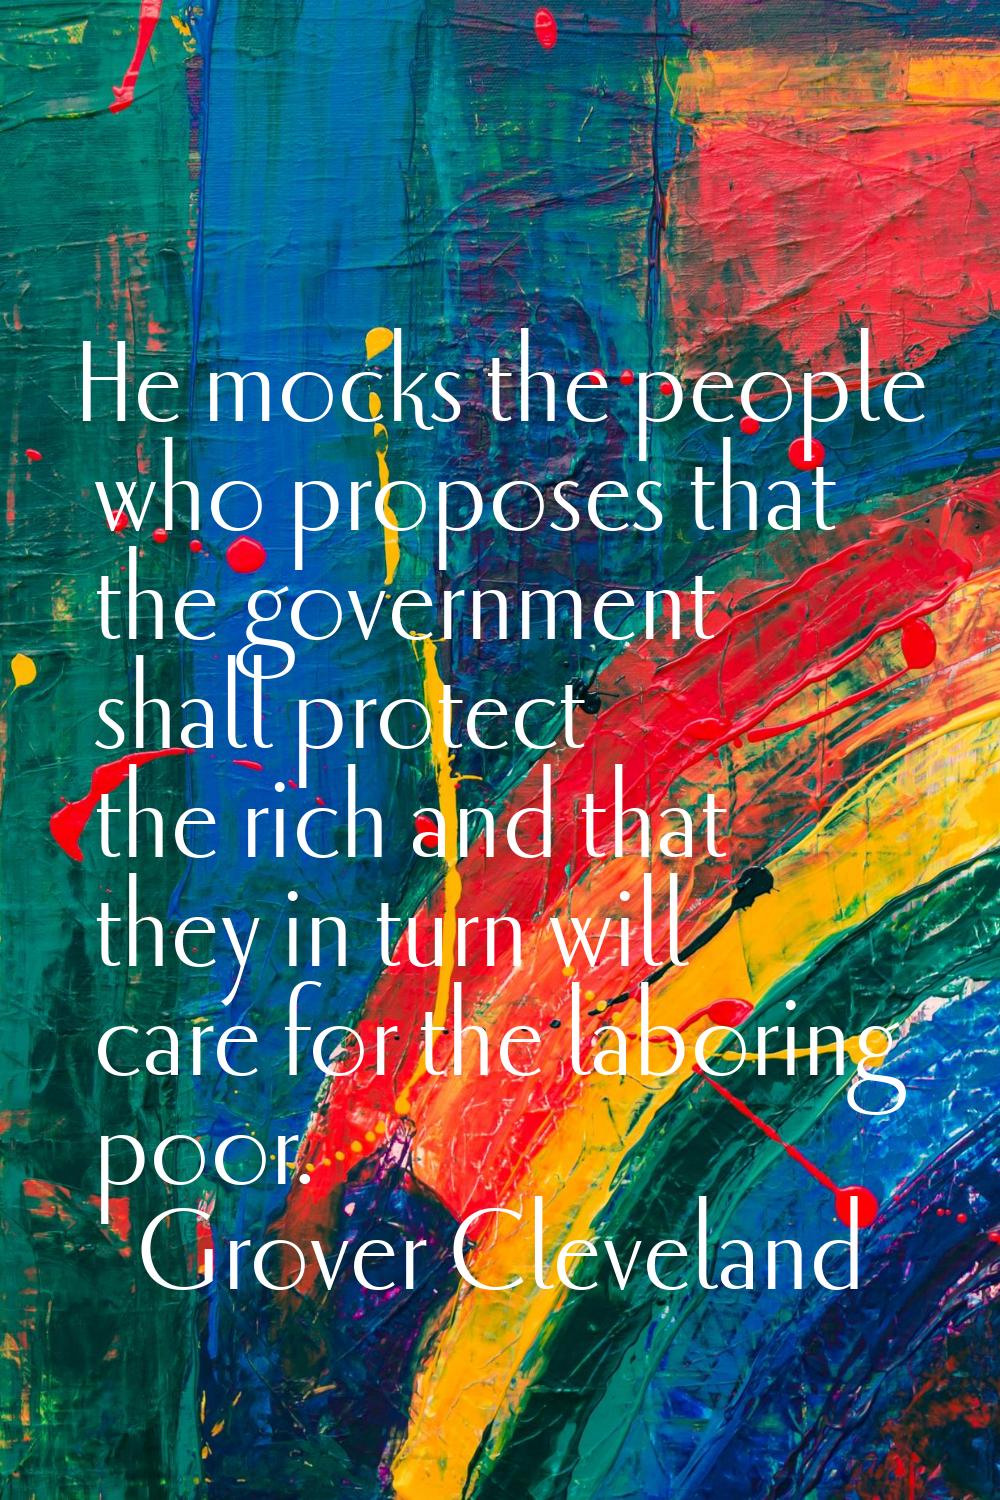 He mocks the people who proposes that the government shall protect the rich and that they in turn w